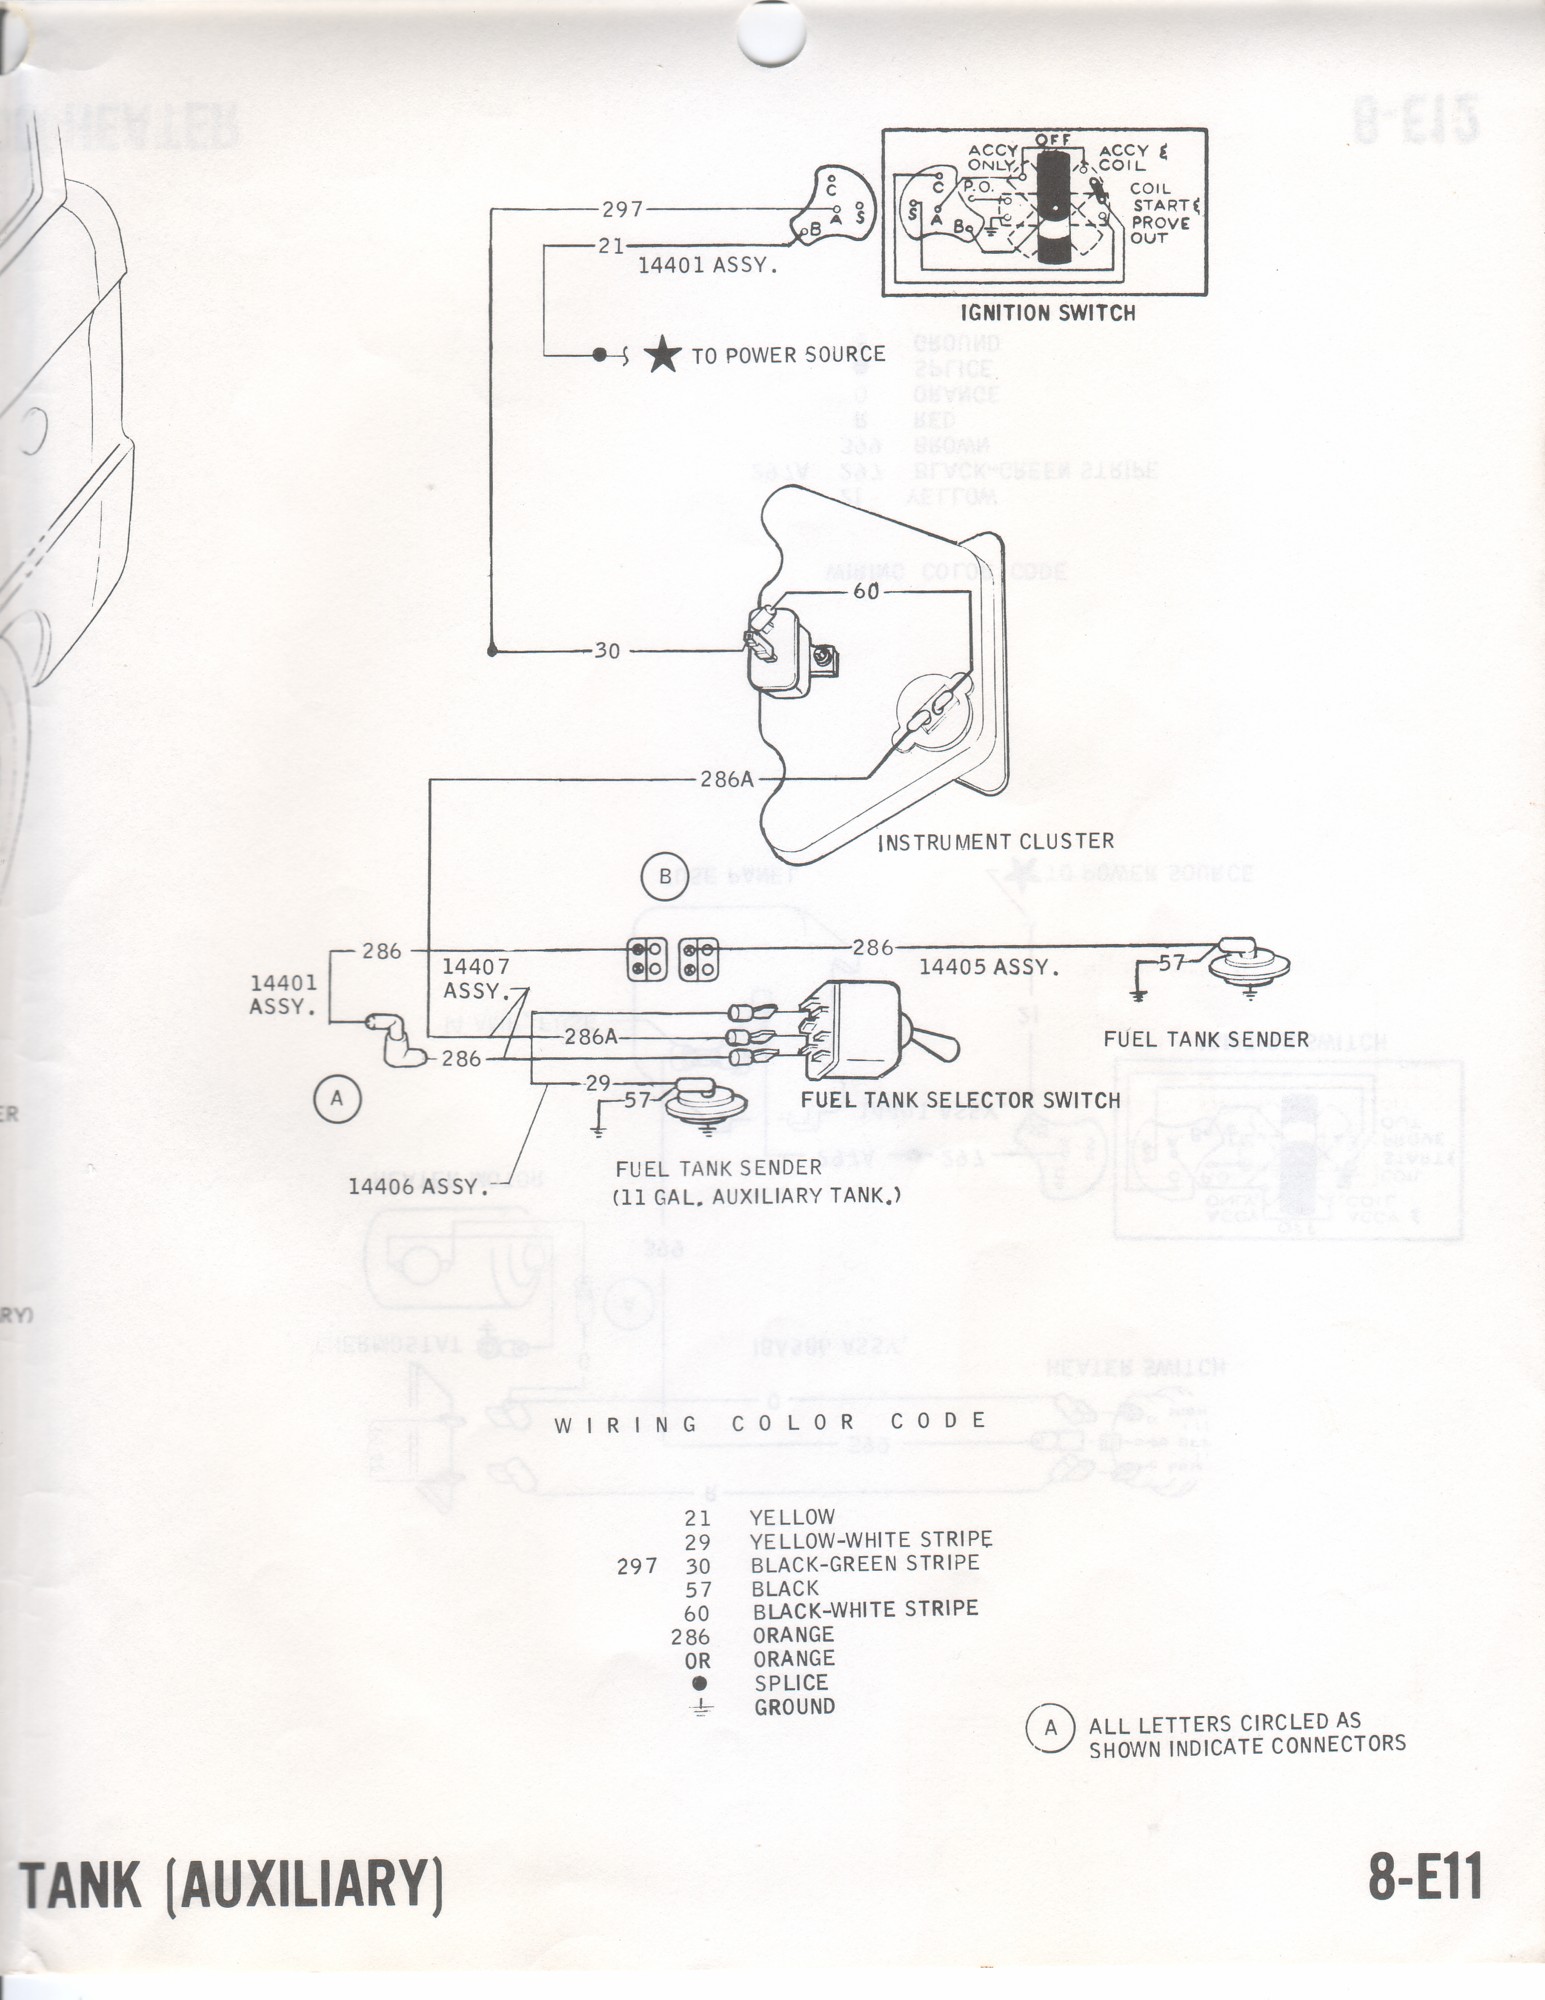 Ford Fuel Tank Selector Switch Wiring Diagram from broncozone.com